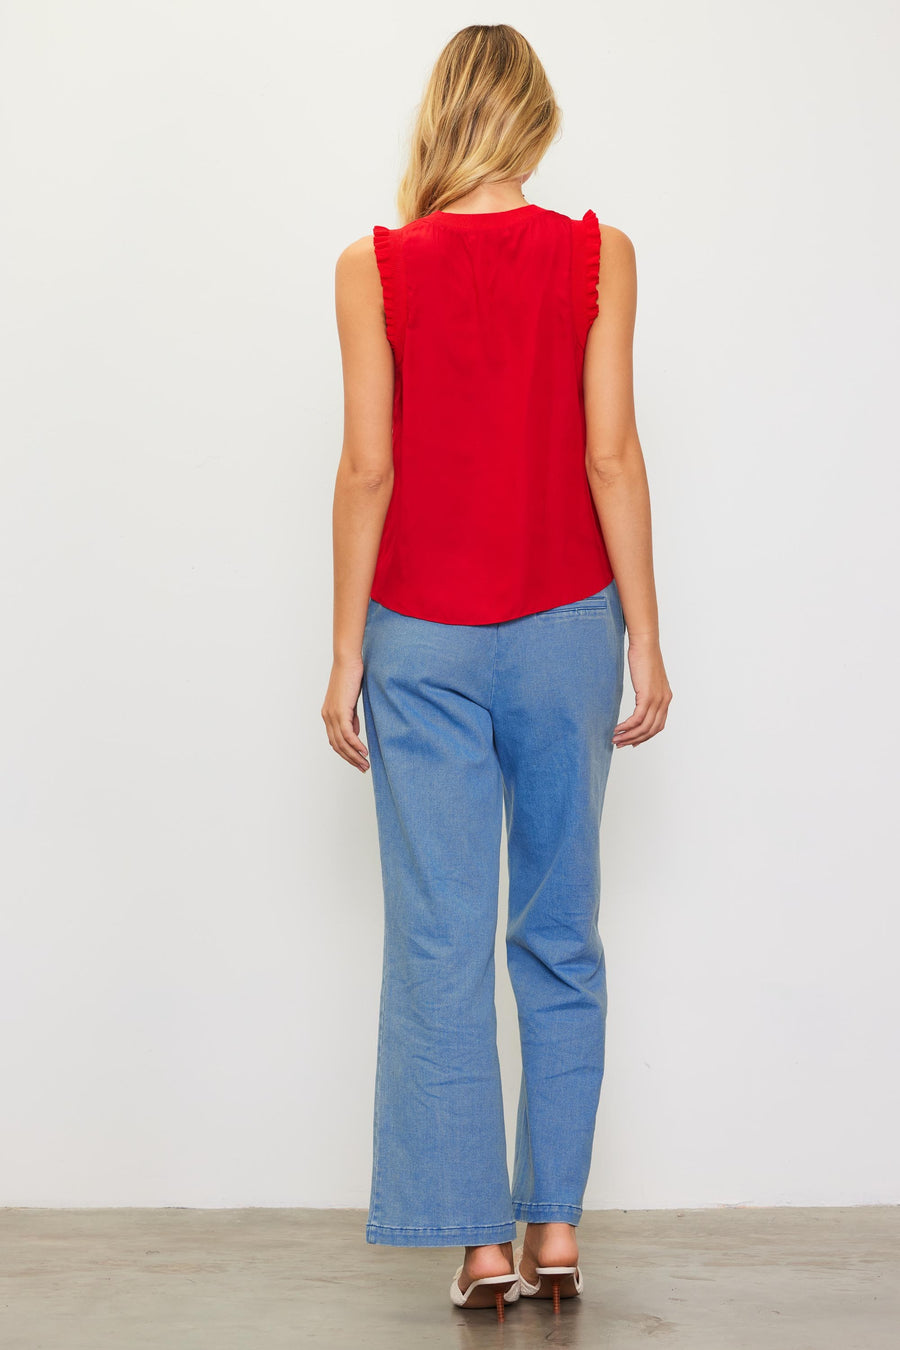 SKIES ARE BLUE Ruffle Contrast Sleeveless Top - Radiant Red